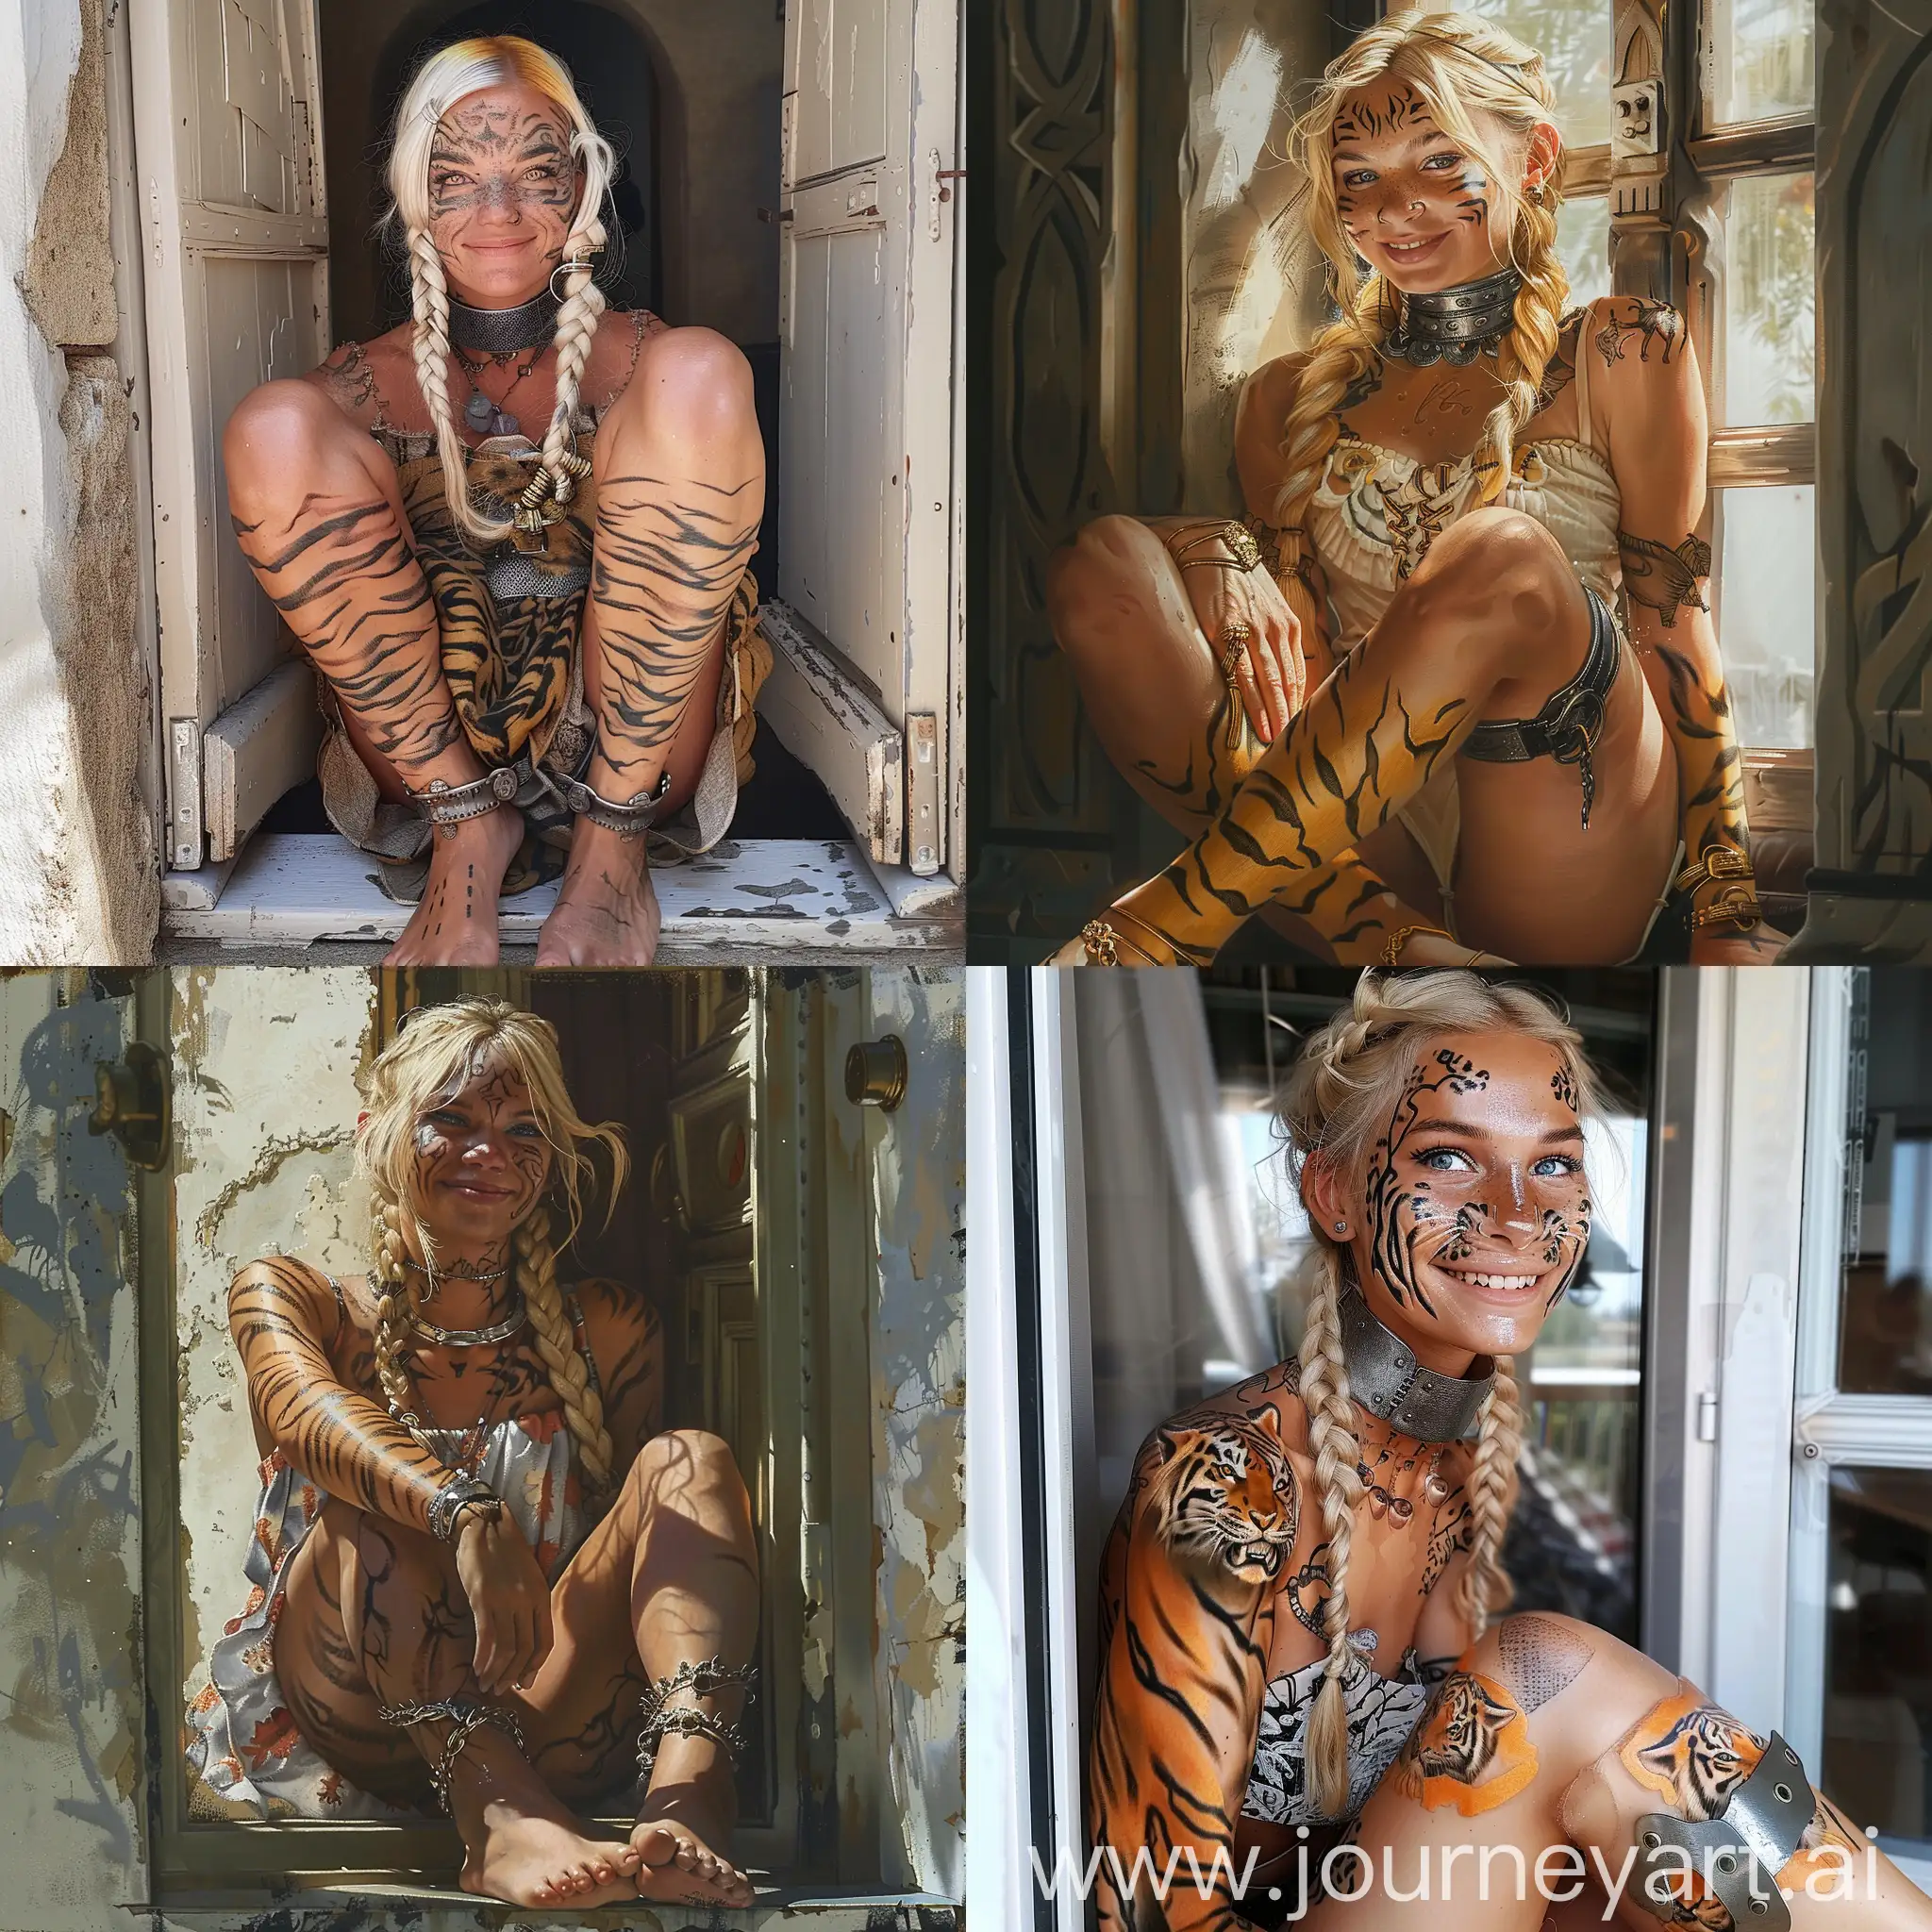 Photorealistic. Blonde woman. Plaits. Realistic tiger markings tattooed on face and neck. Barefoot. Tiger stripes tattooed on feet and ankles. Wearing a summer dress and a metal collar. Sitting in a window. Smiling. Ankle cuffs